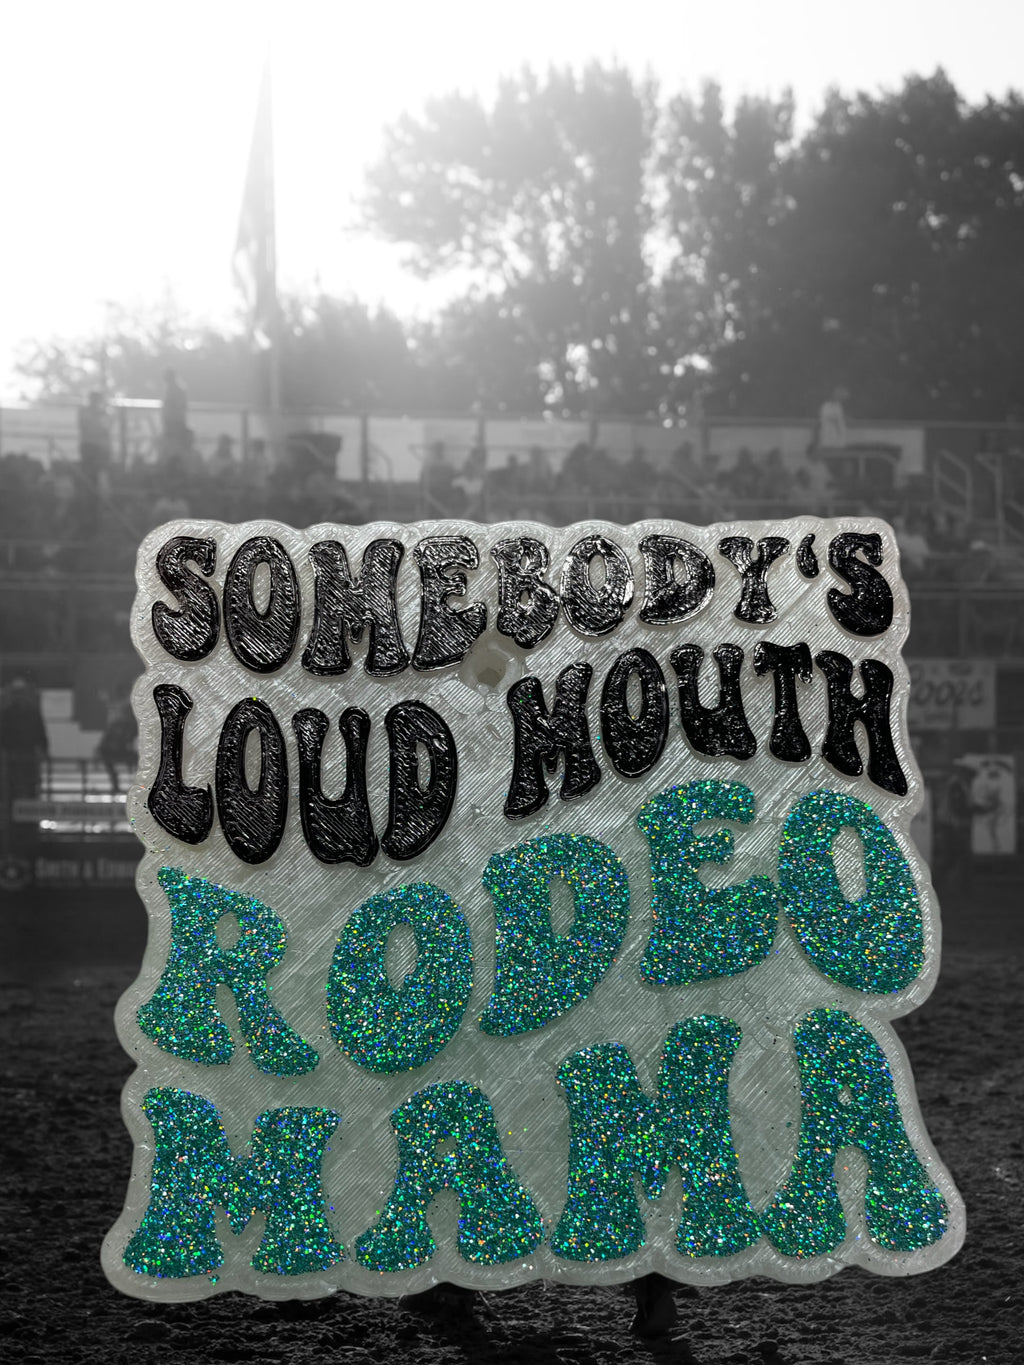 Loud mouth rodeo mama